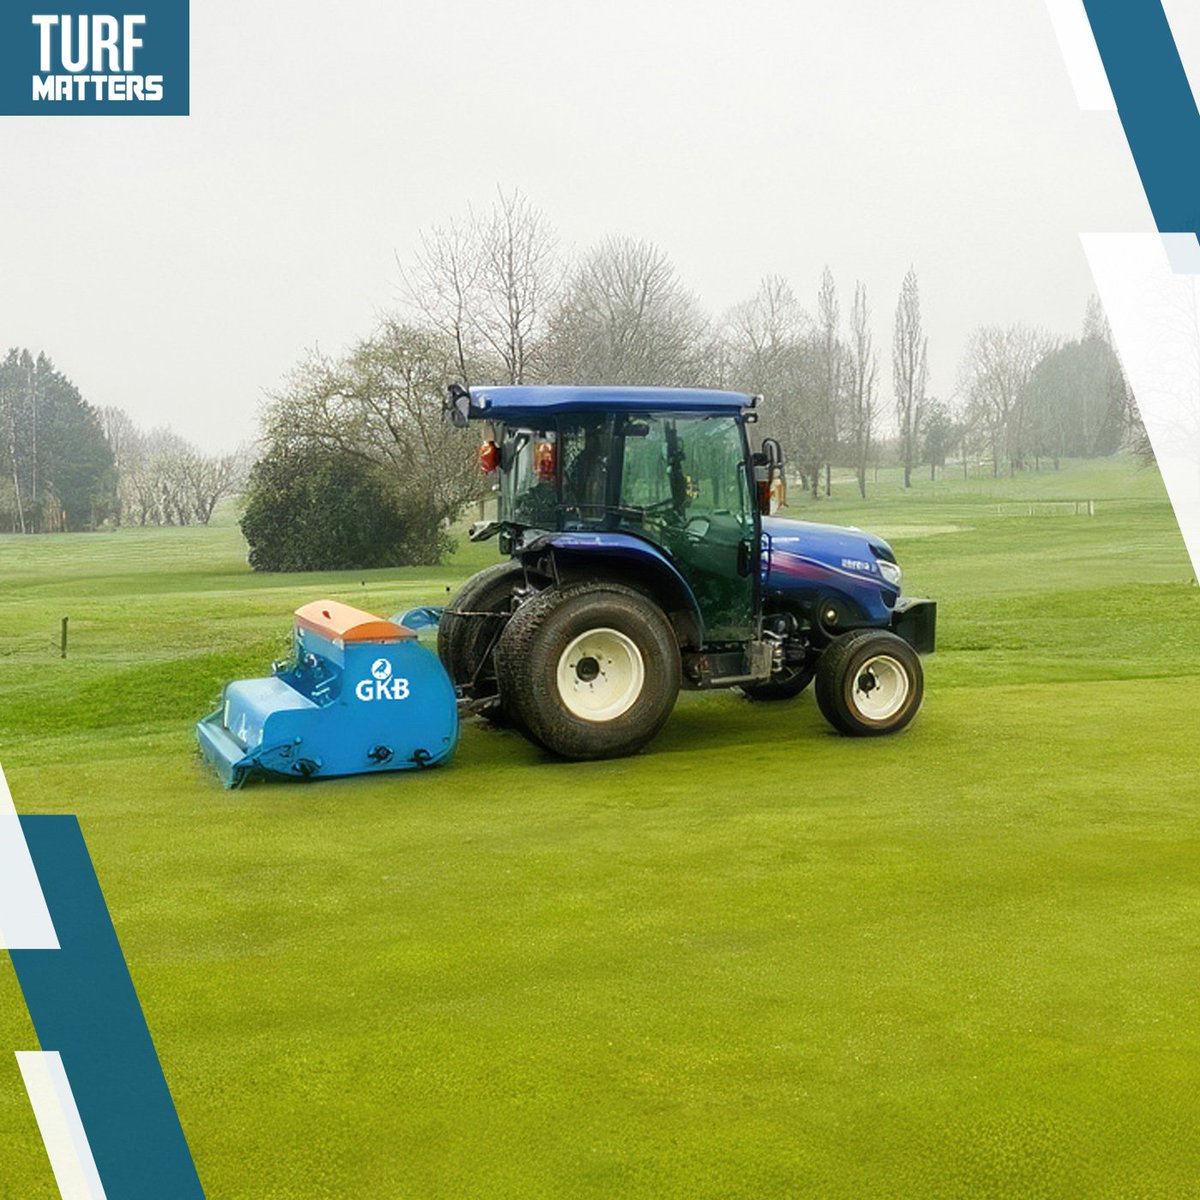 #TurfNews The purchase of a Combiseeder from @GKBmachines has brought new convenience and efficiency to the overseeding operations at Hertfordshire’s Letchworth Golf Club. Read more 👉 turfmatters.co.uk/combiseeder-br…